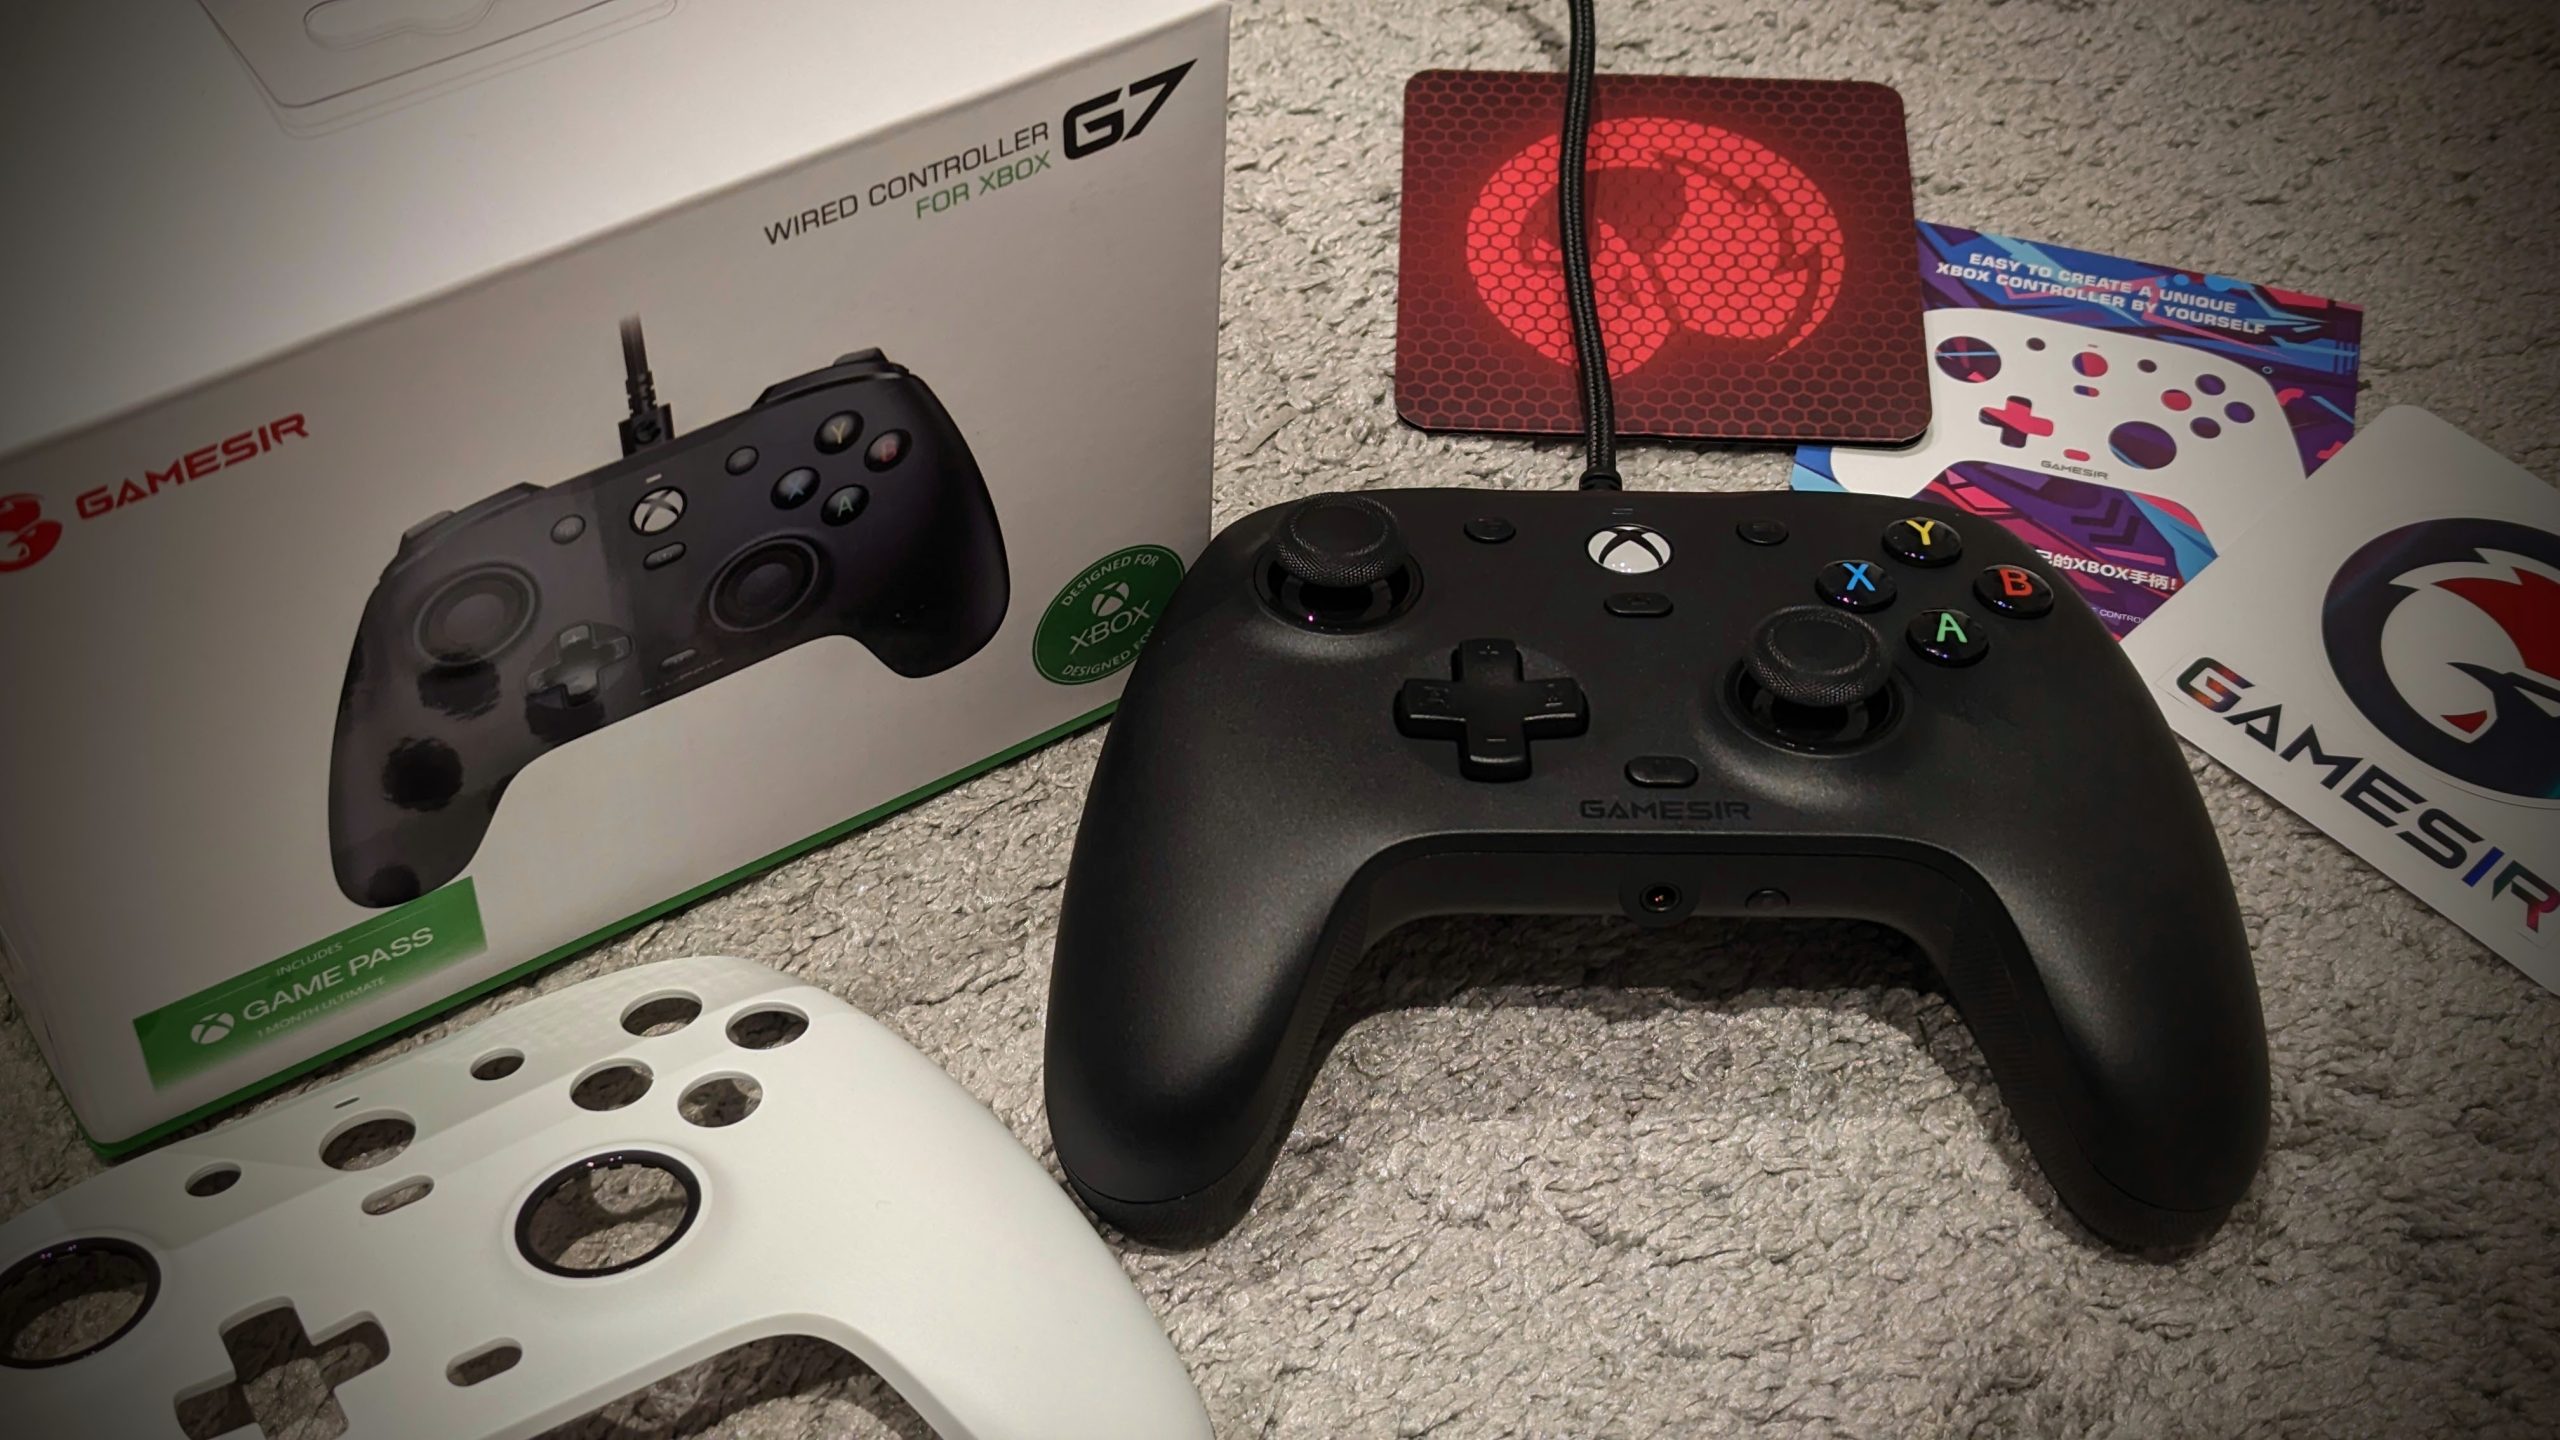 GameSir G7 review: beats Xbox at its own game